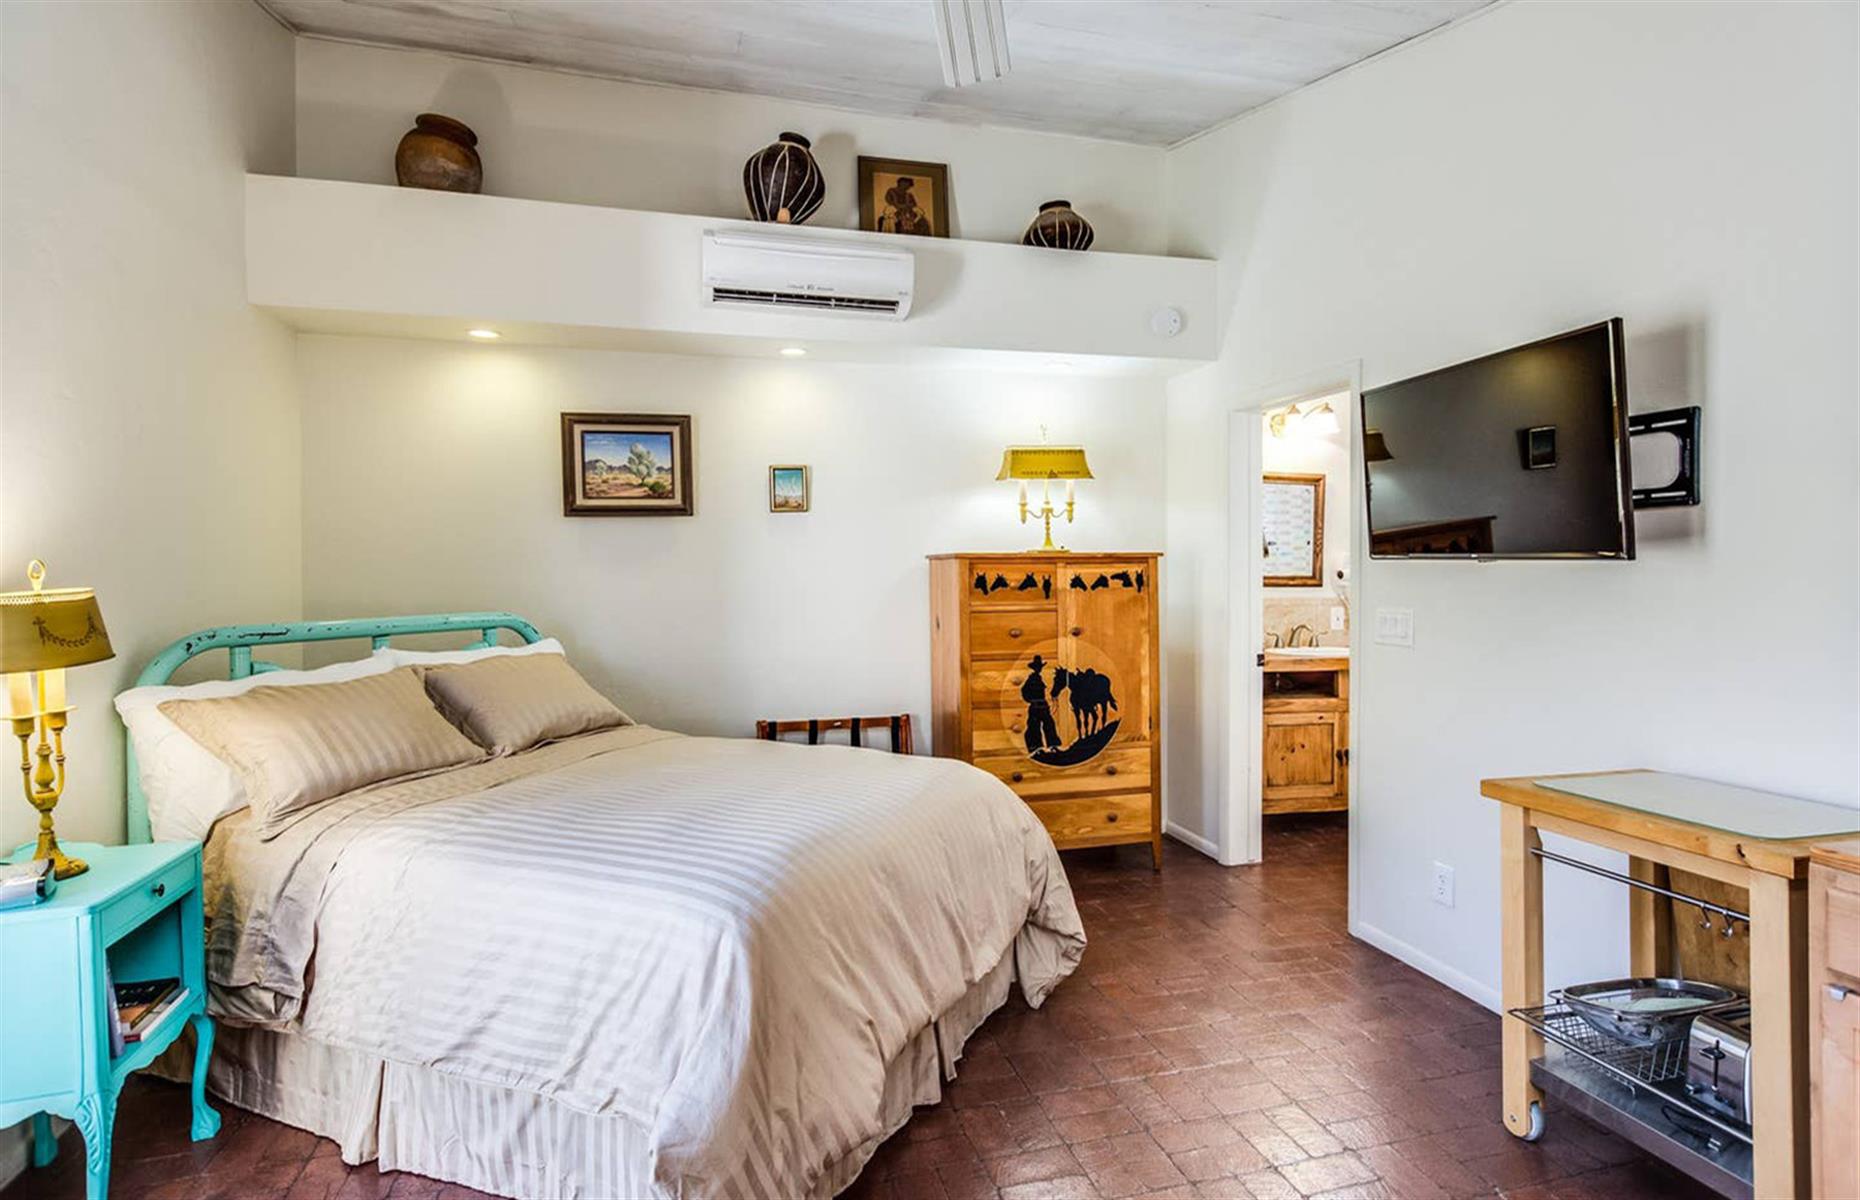 <p>Located in central Tucson with a view to the north of the Catalina Mountains, <a href="https://www.airbnb.co.uk/rooms/29280682">this studio</a> has a private walled patio and offers access to a secure parking space. Downtown Tucson is only 20 minutes away, however, there are plenty of shops, bars and restaurants nearby the studio as well. (Be sure to check the opening status of individual outlets before you venture out.) Available to book for $65 a night, the Airbnb itself has a luxury double bed, a full bath and a well-appointed kitchenette. </p>